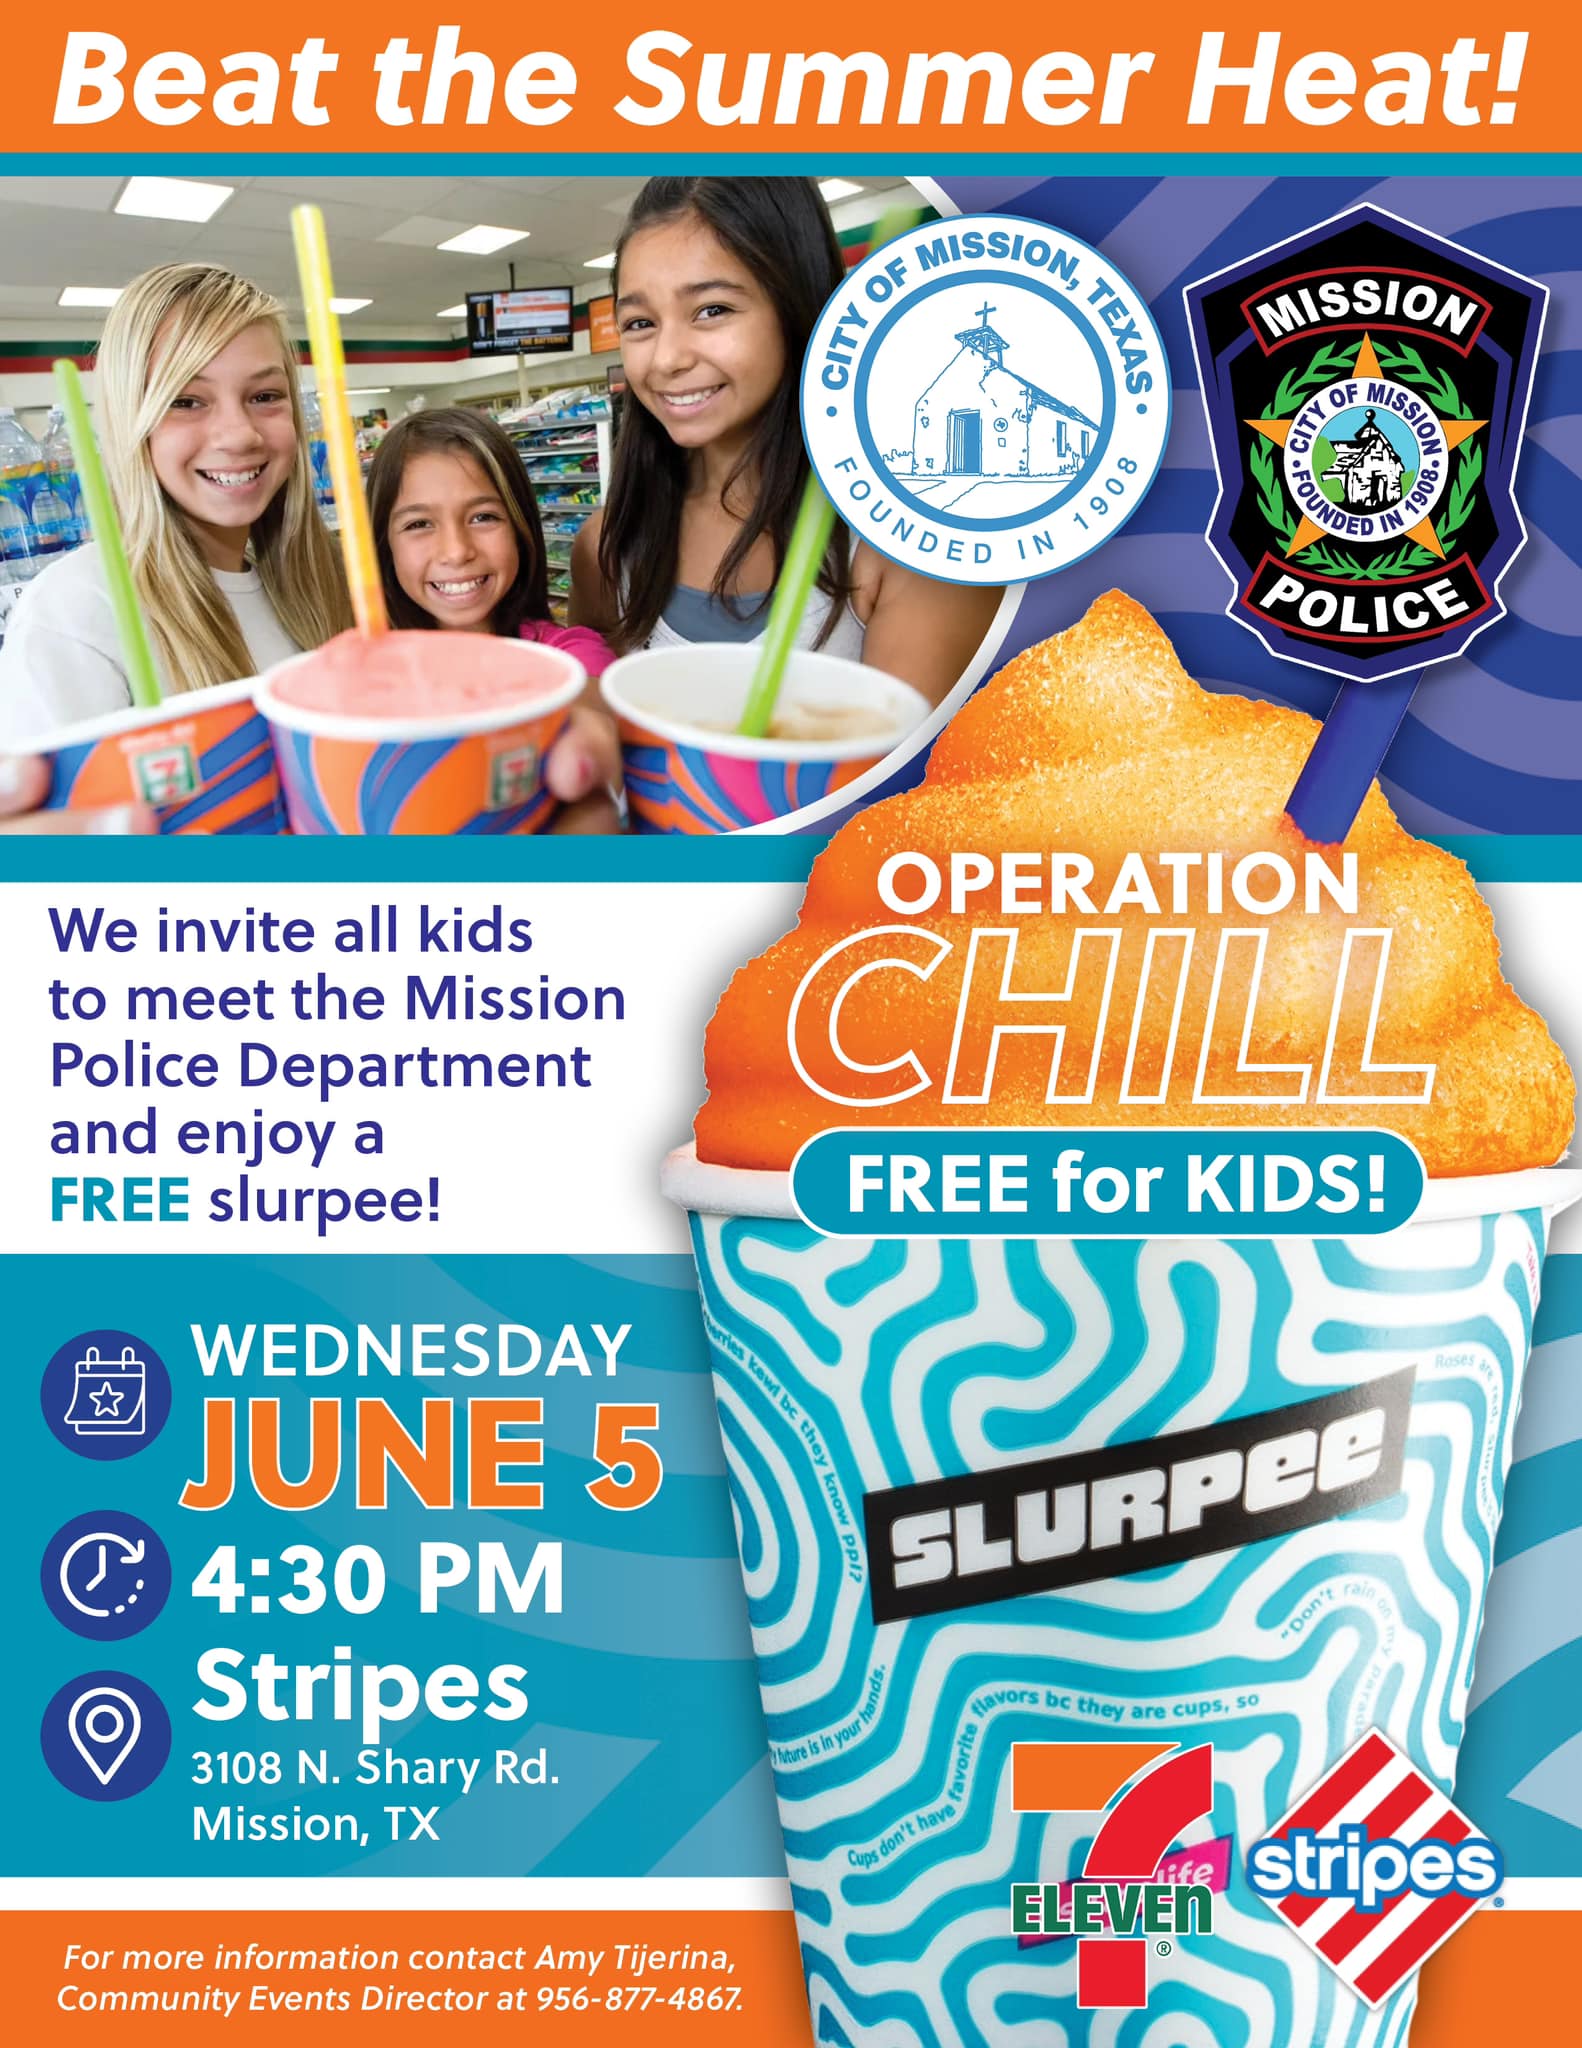 Operation Chill With Mission Police Department